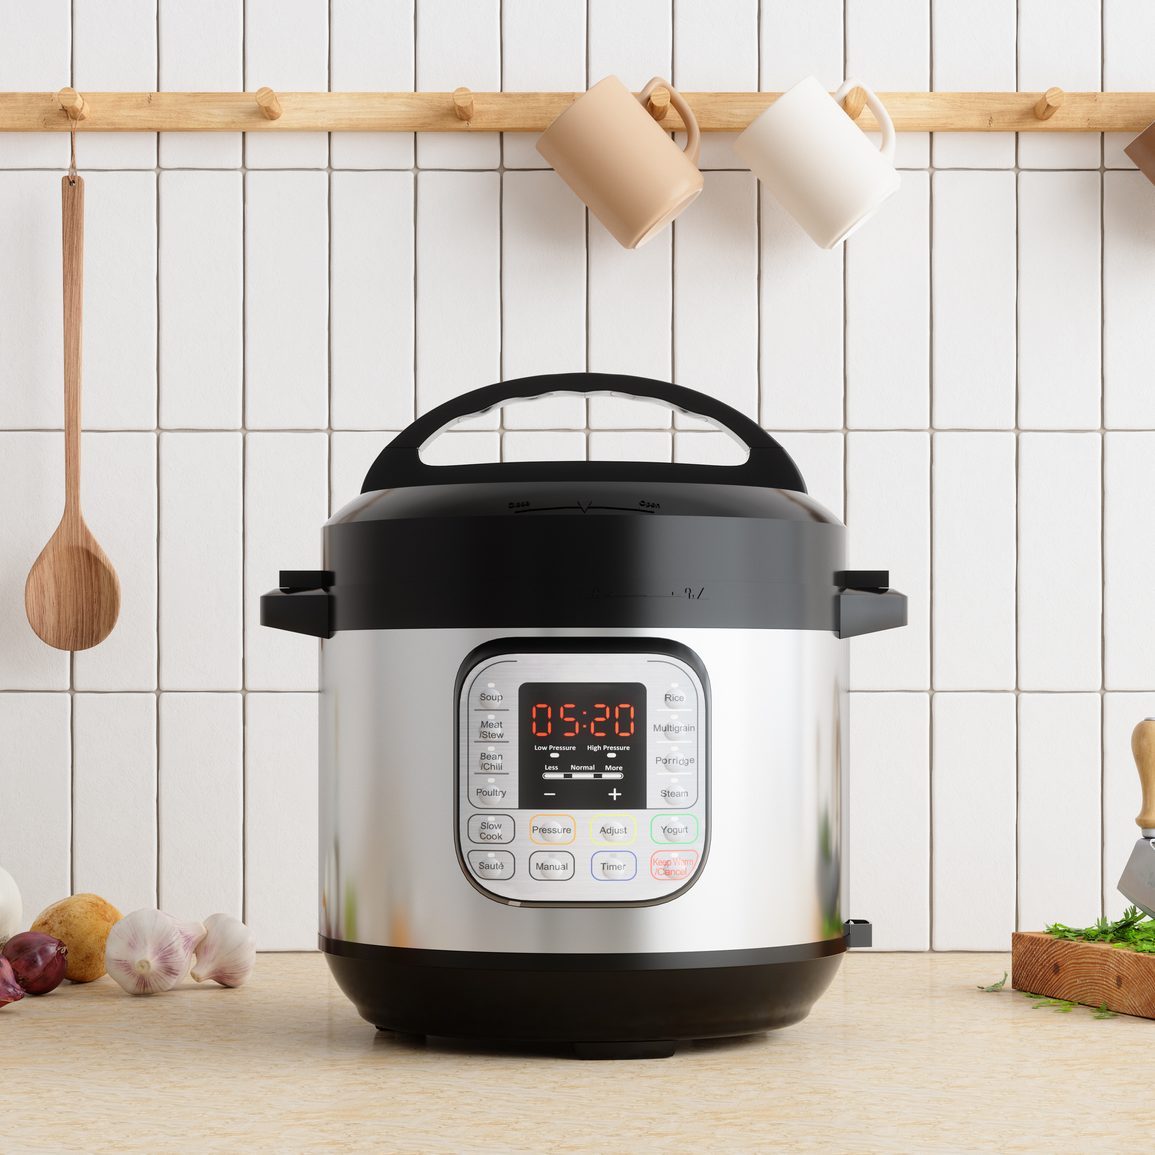 We Tried 10 of the Internet's Best Instant Pot Recipes. And These